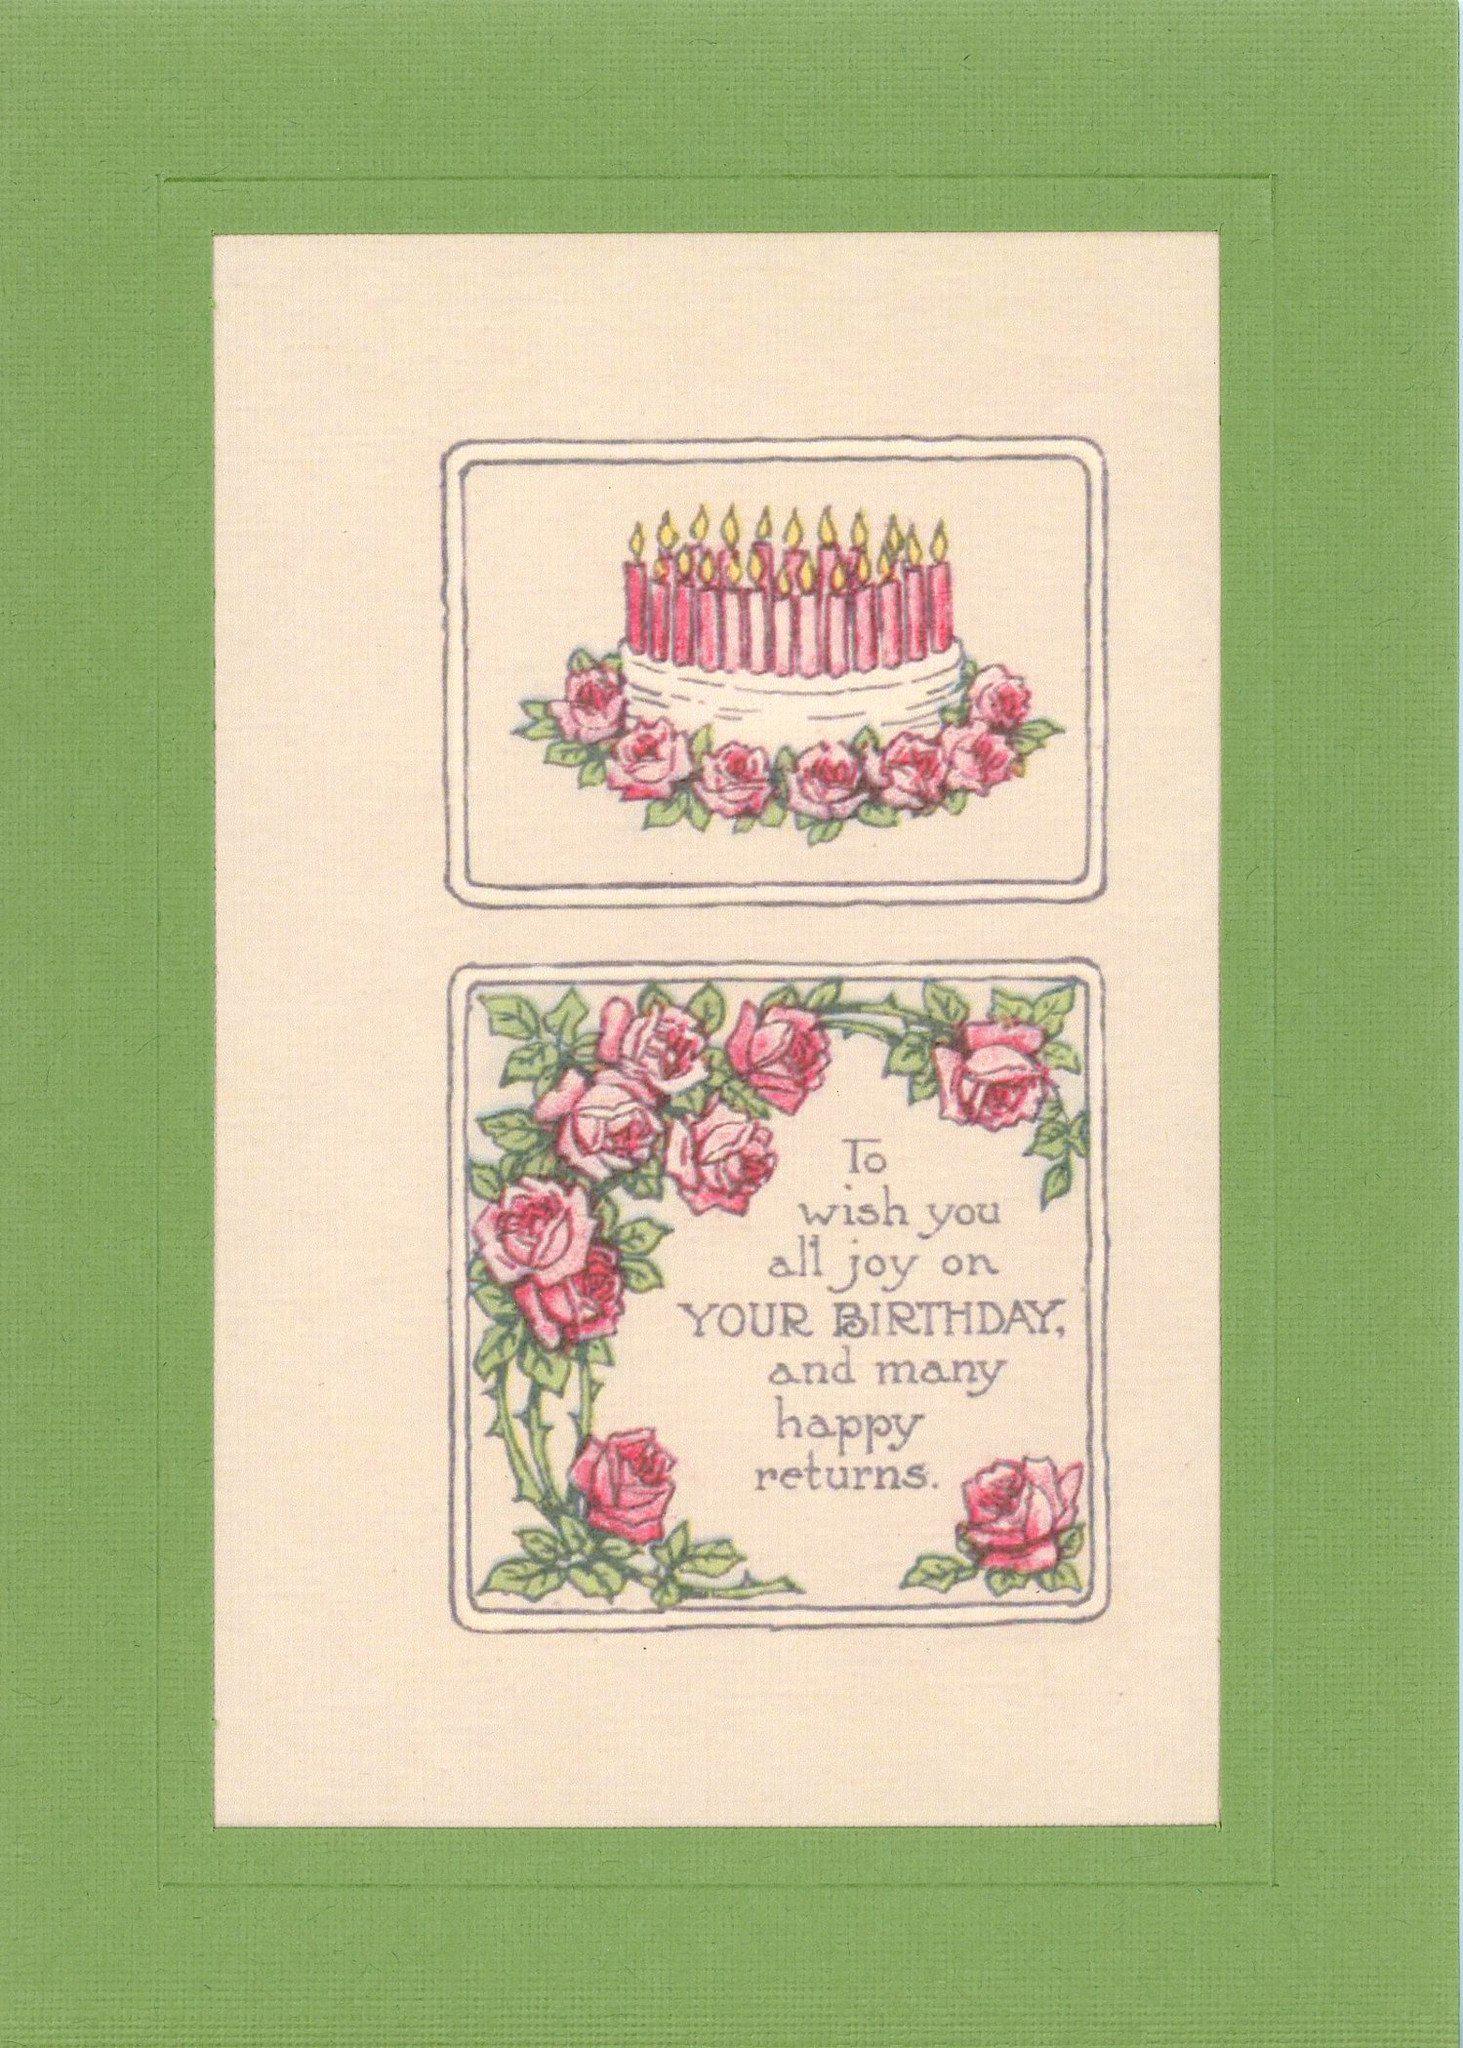 Wish Joy on Birthday-Greetings from the Past-Plymouth Cards